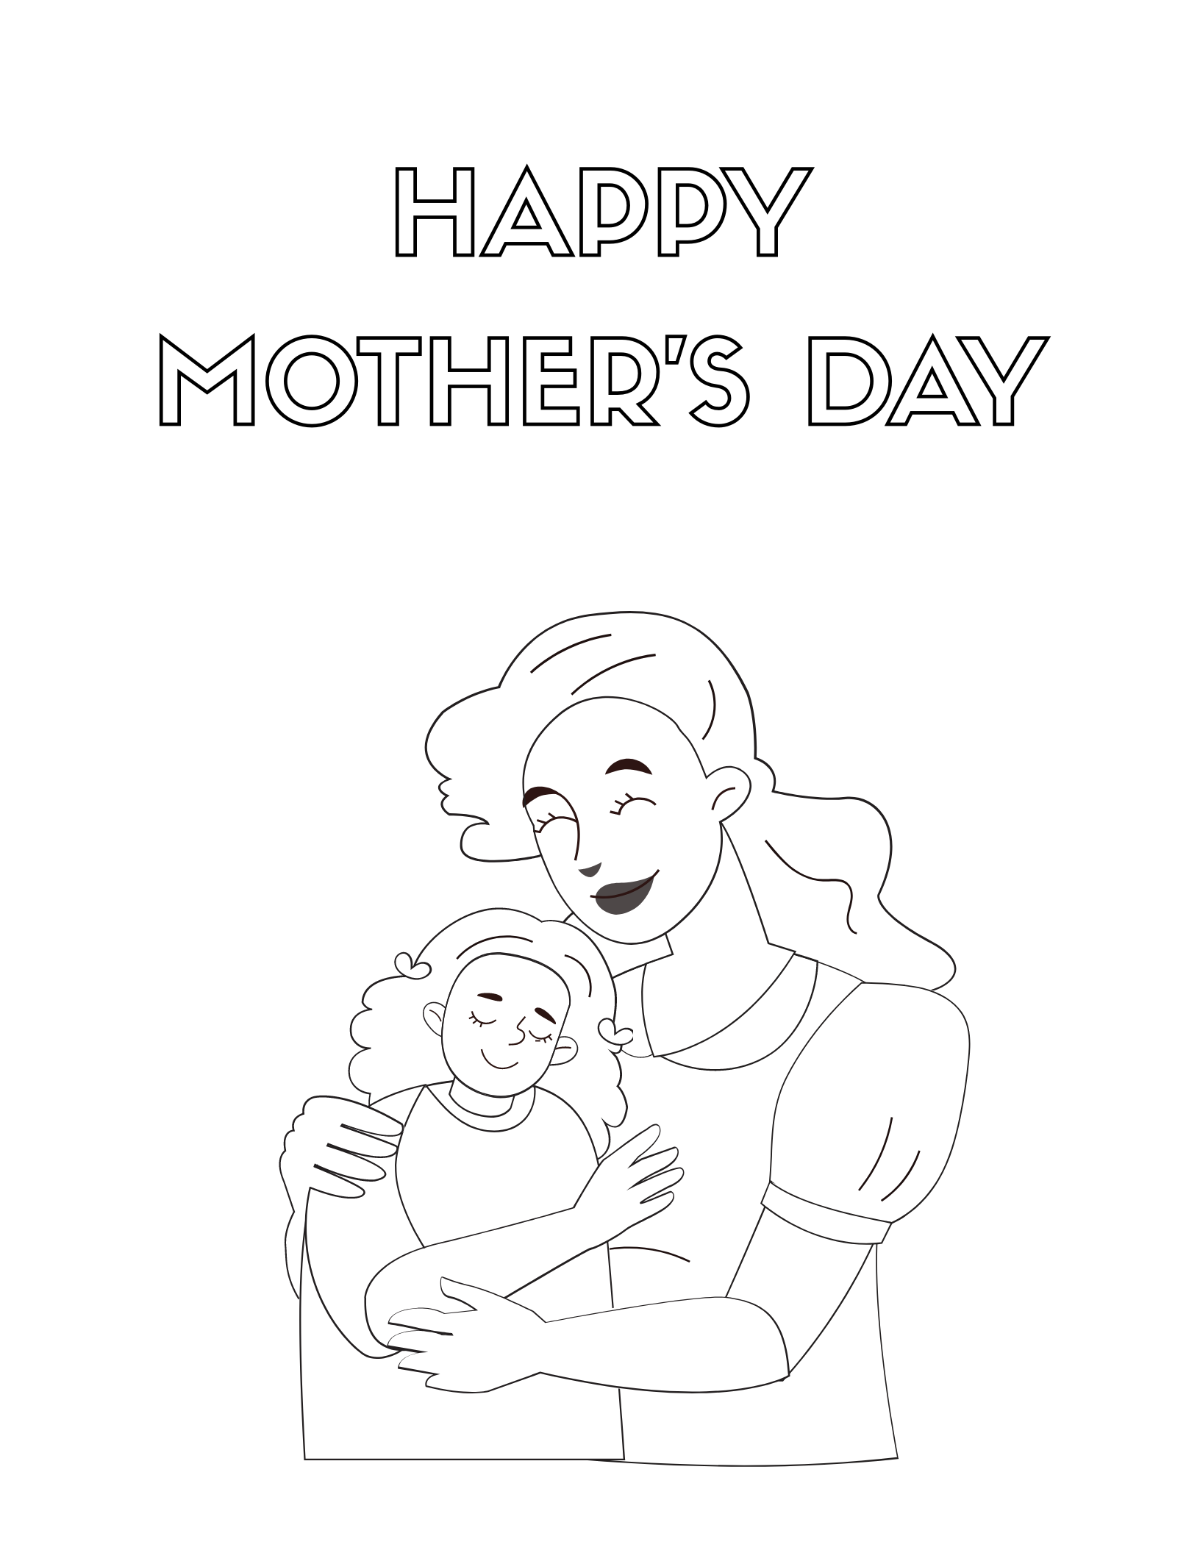 Mother's Day Coloring Page Template